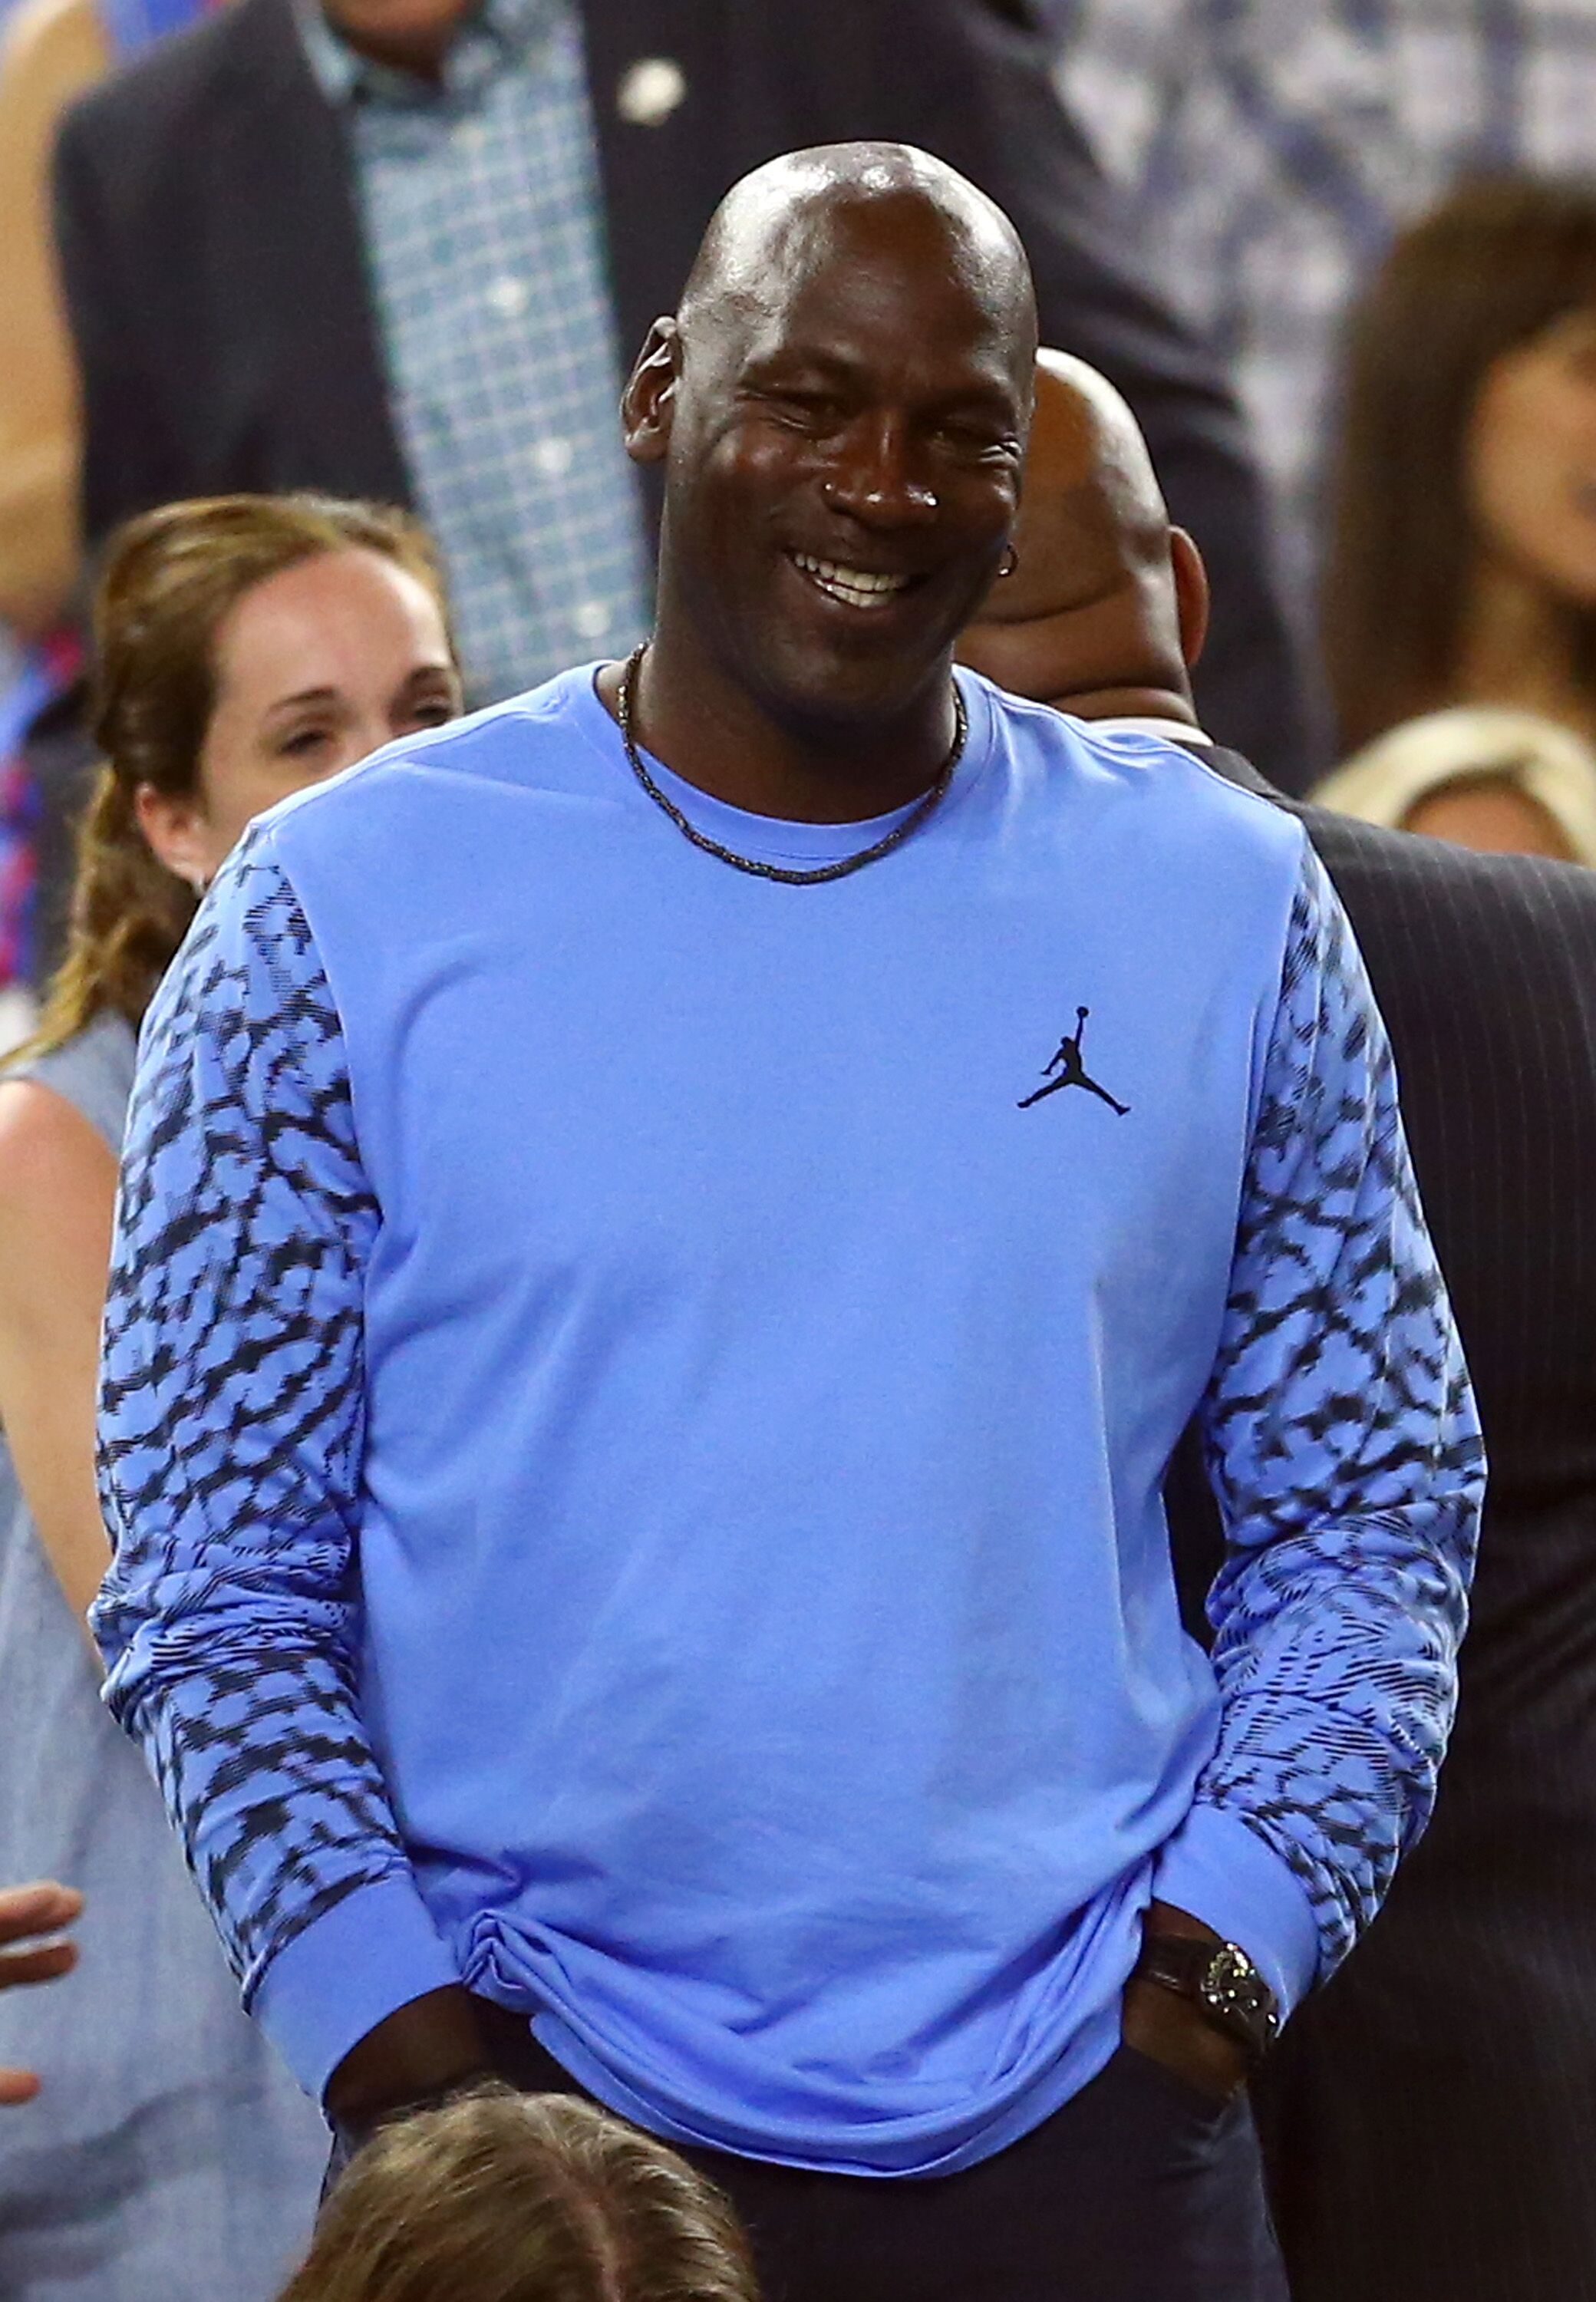 Michael Jordan reacts during the 2016 NCAA Men's Final Four National Championship. | Source: Getty Images